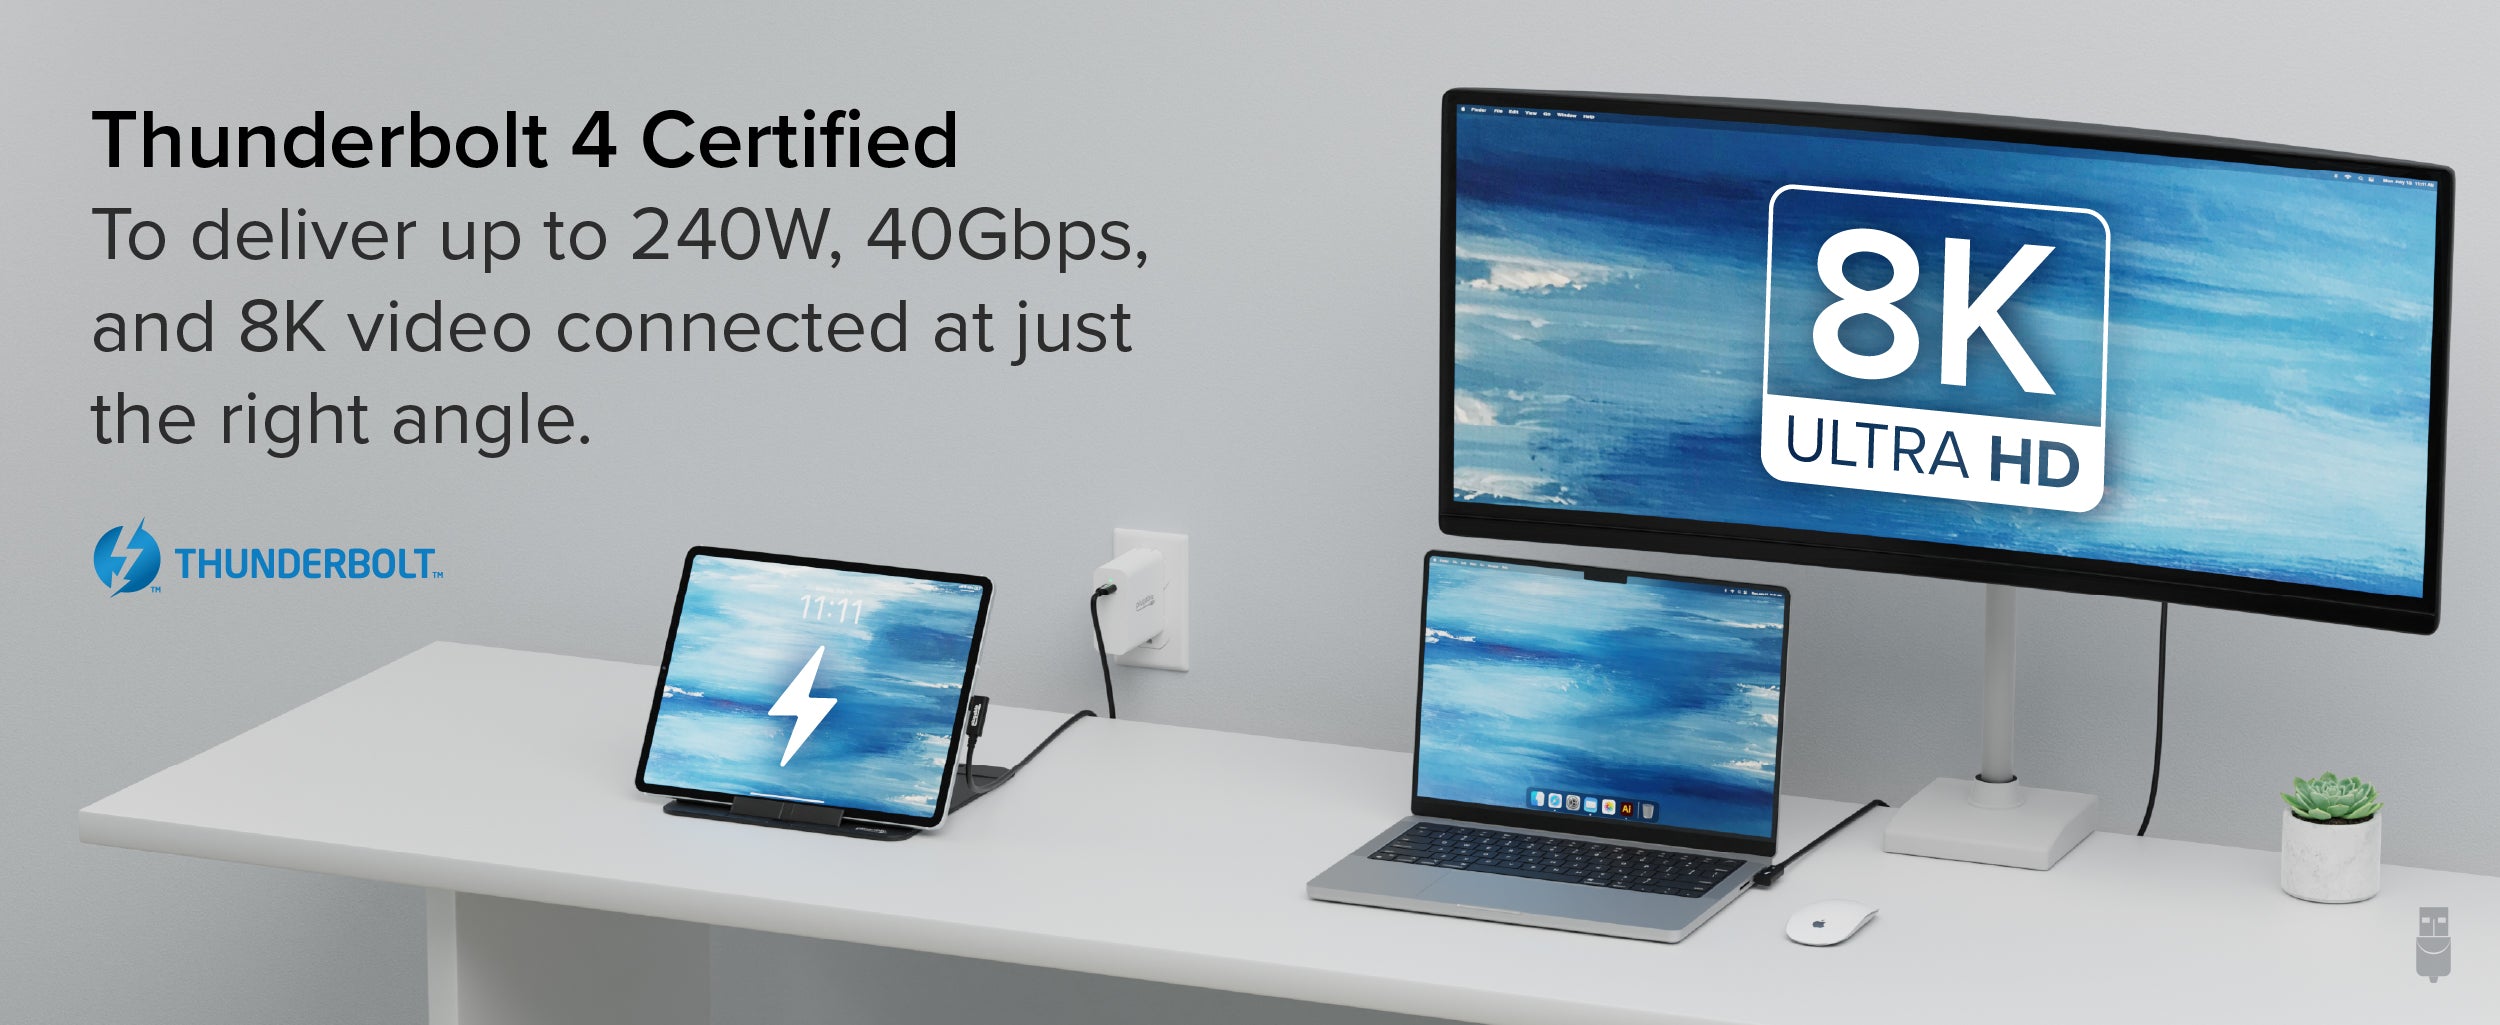 Thunderbolt 4 Certified To deliver up to 240W, 40Gbps, and 8K video connected at just the right angle